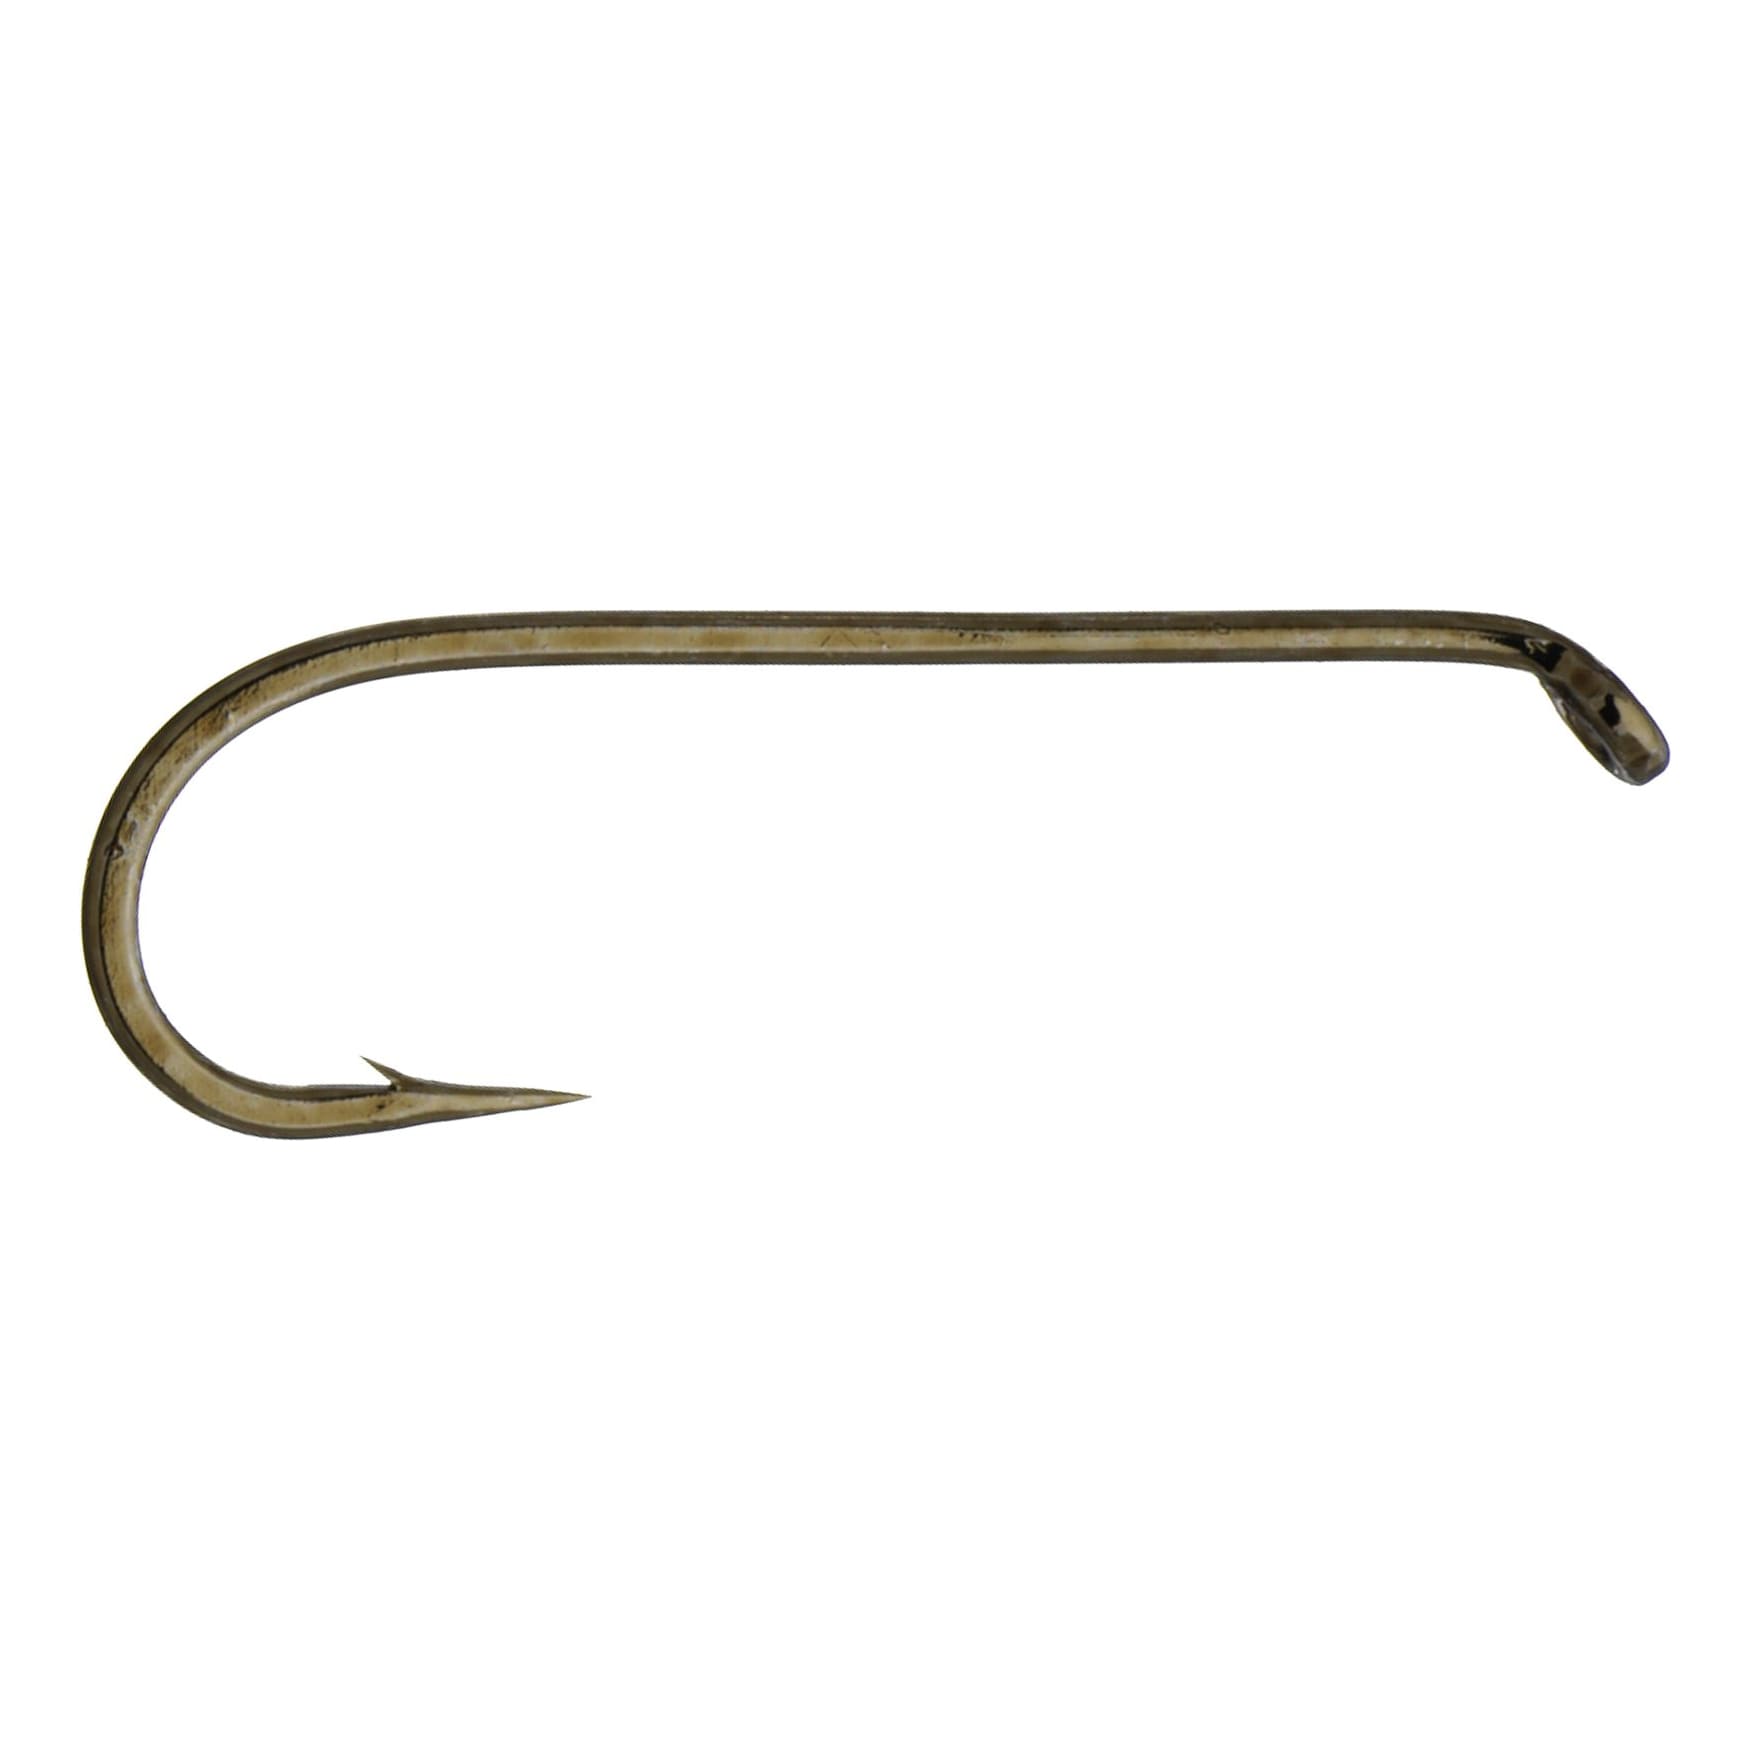 White River Fly Shop® 3X Long All-Purpose Fly Hook